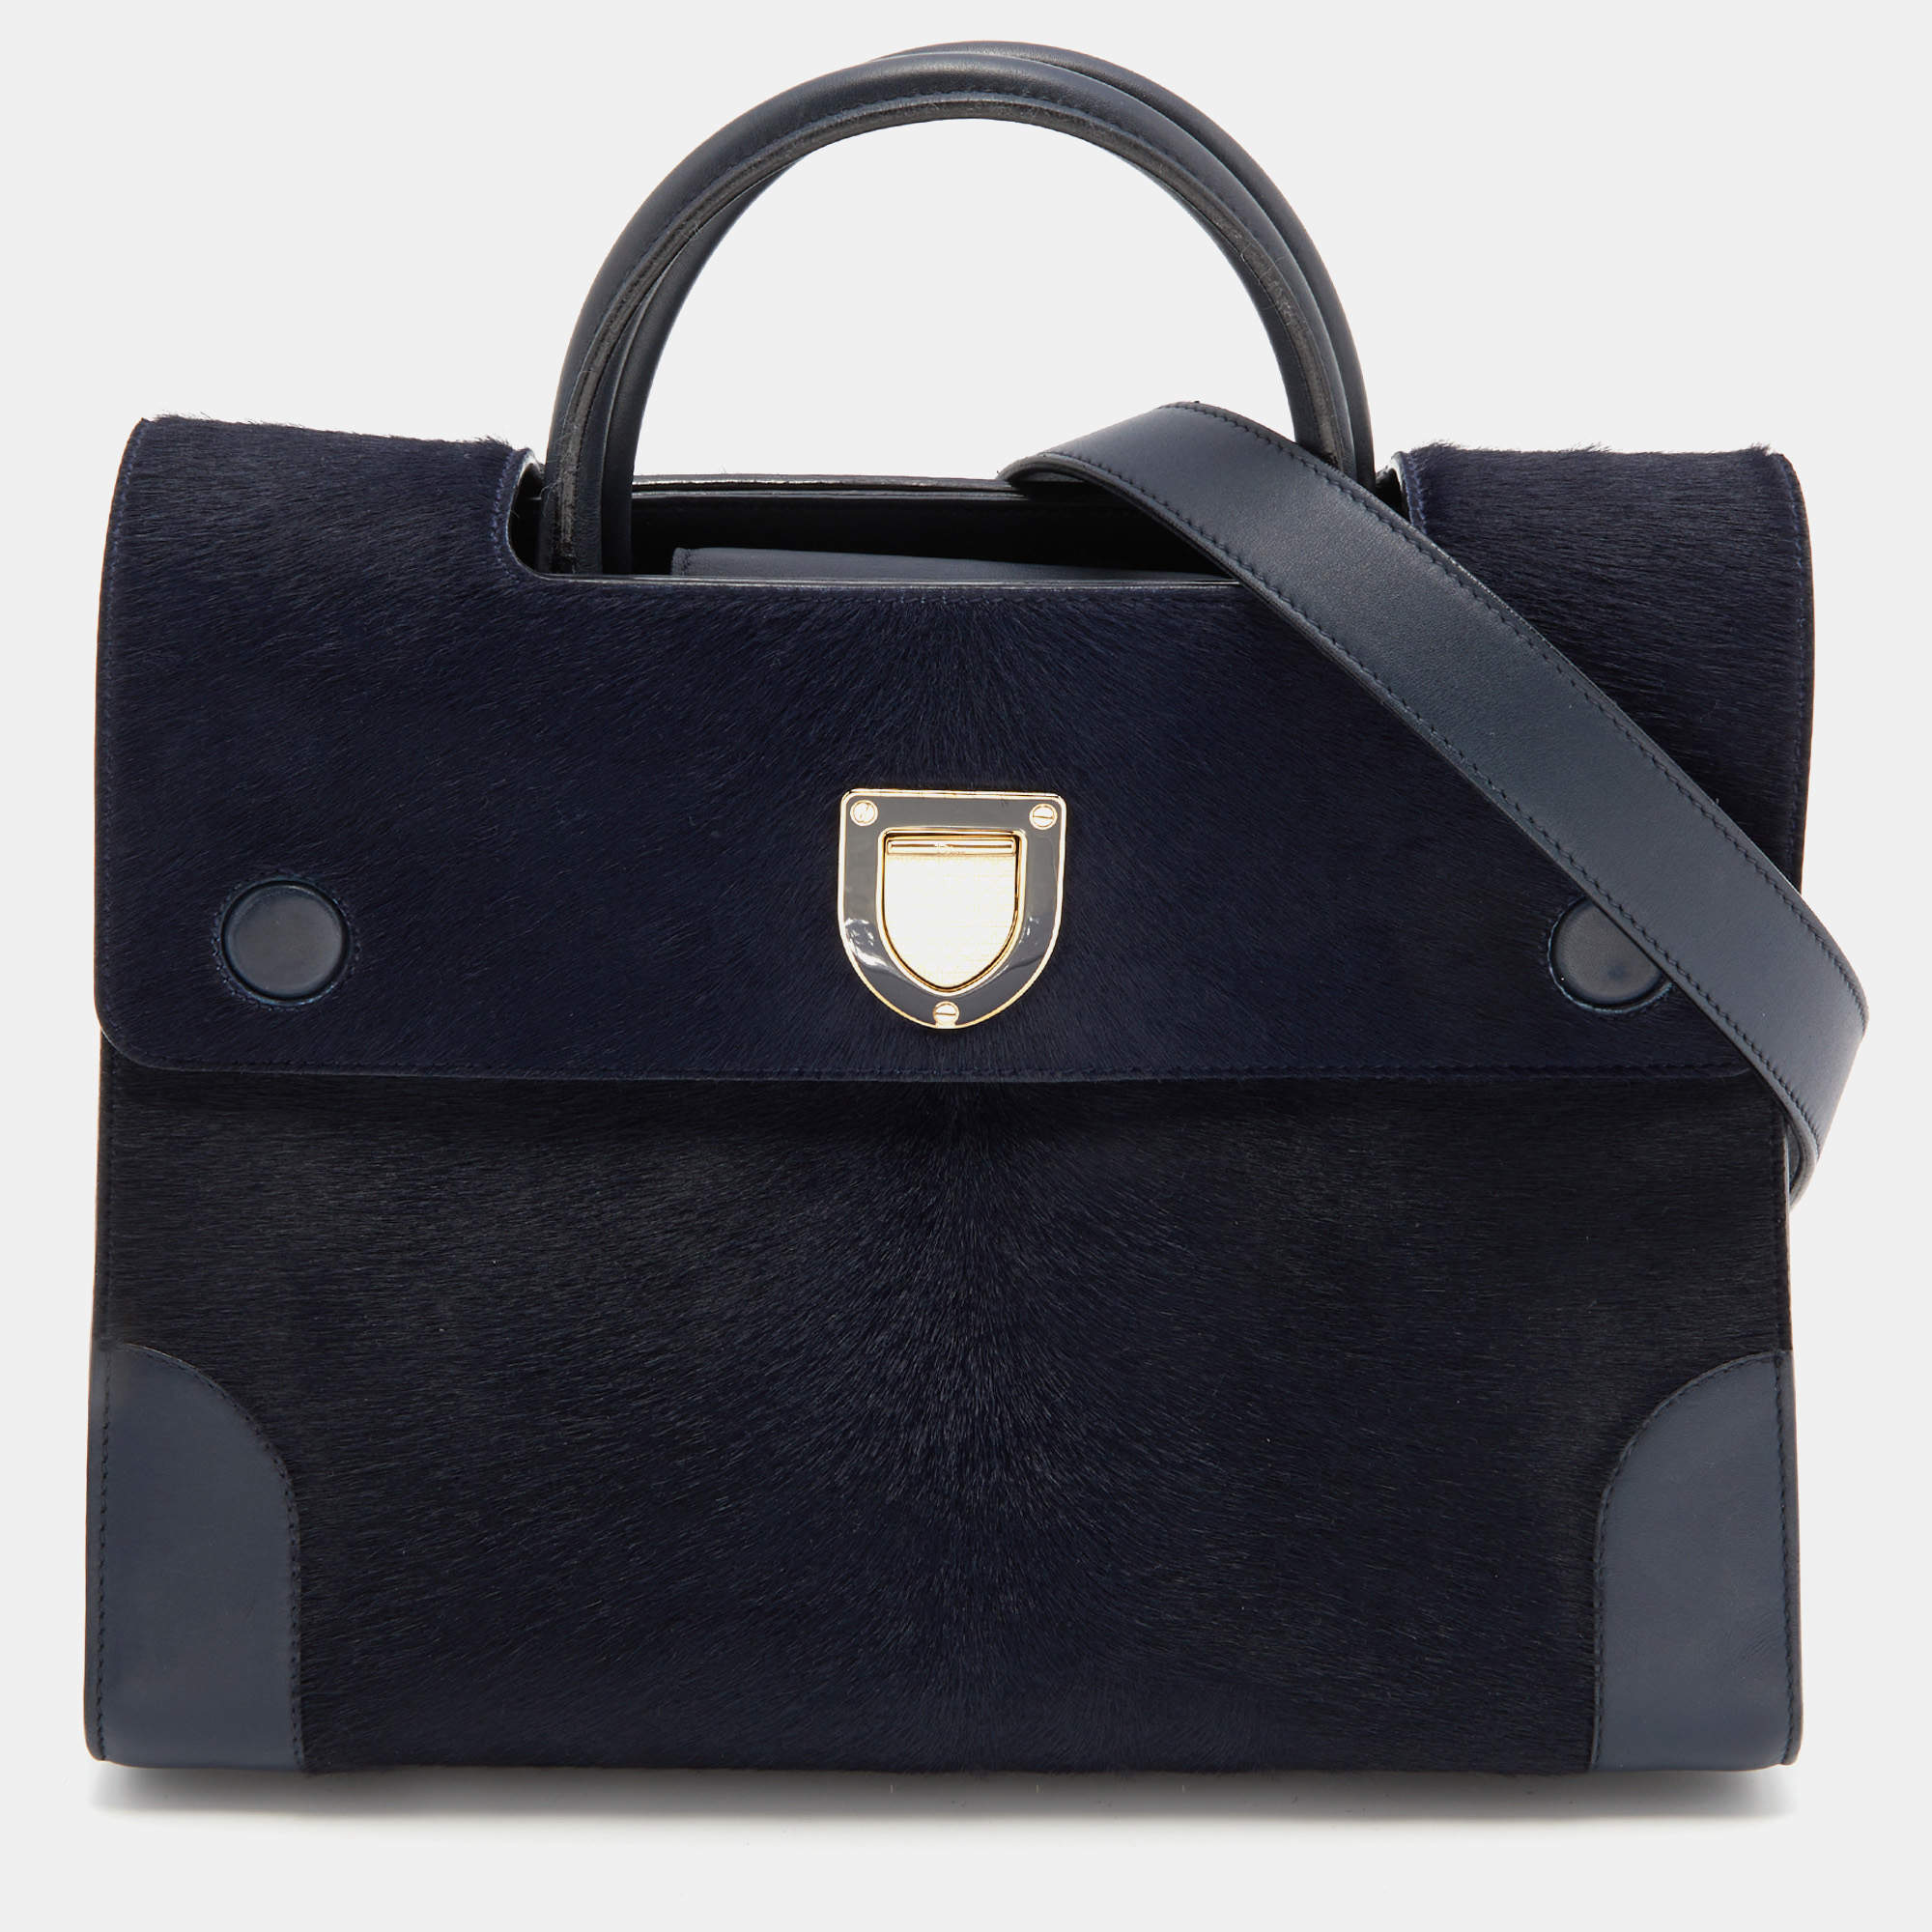 Dior Navy Blue/Brown Leather and Calf Hair Medium Diorever Tote